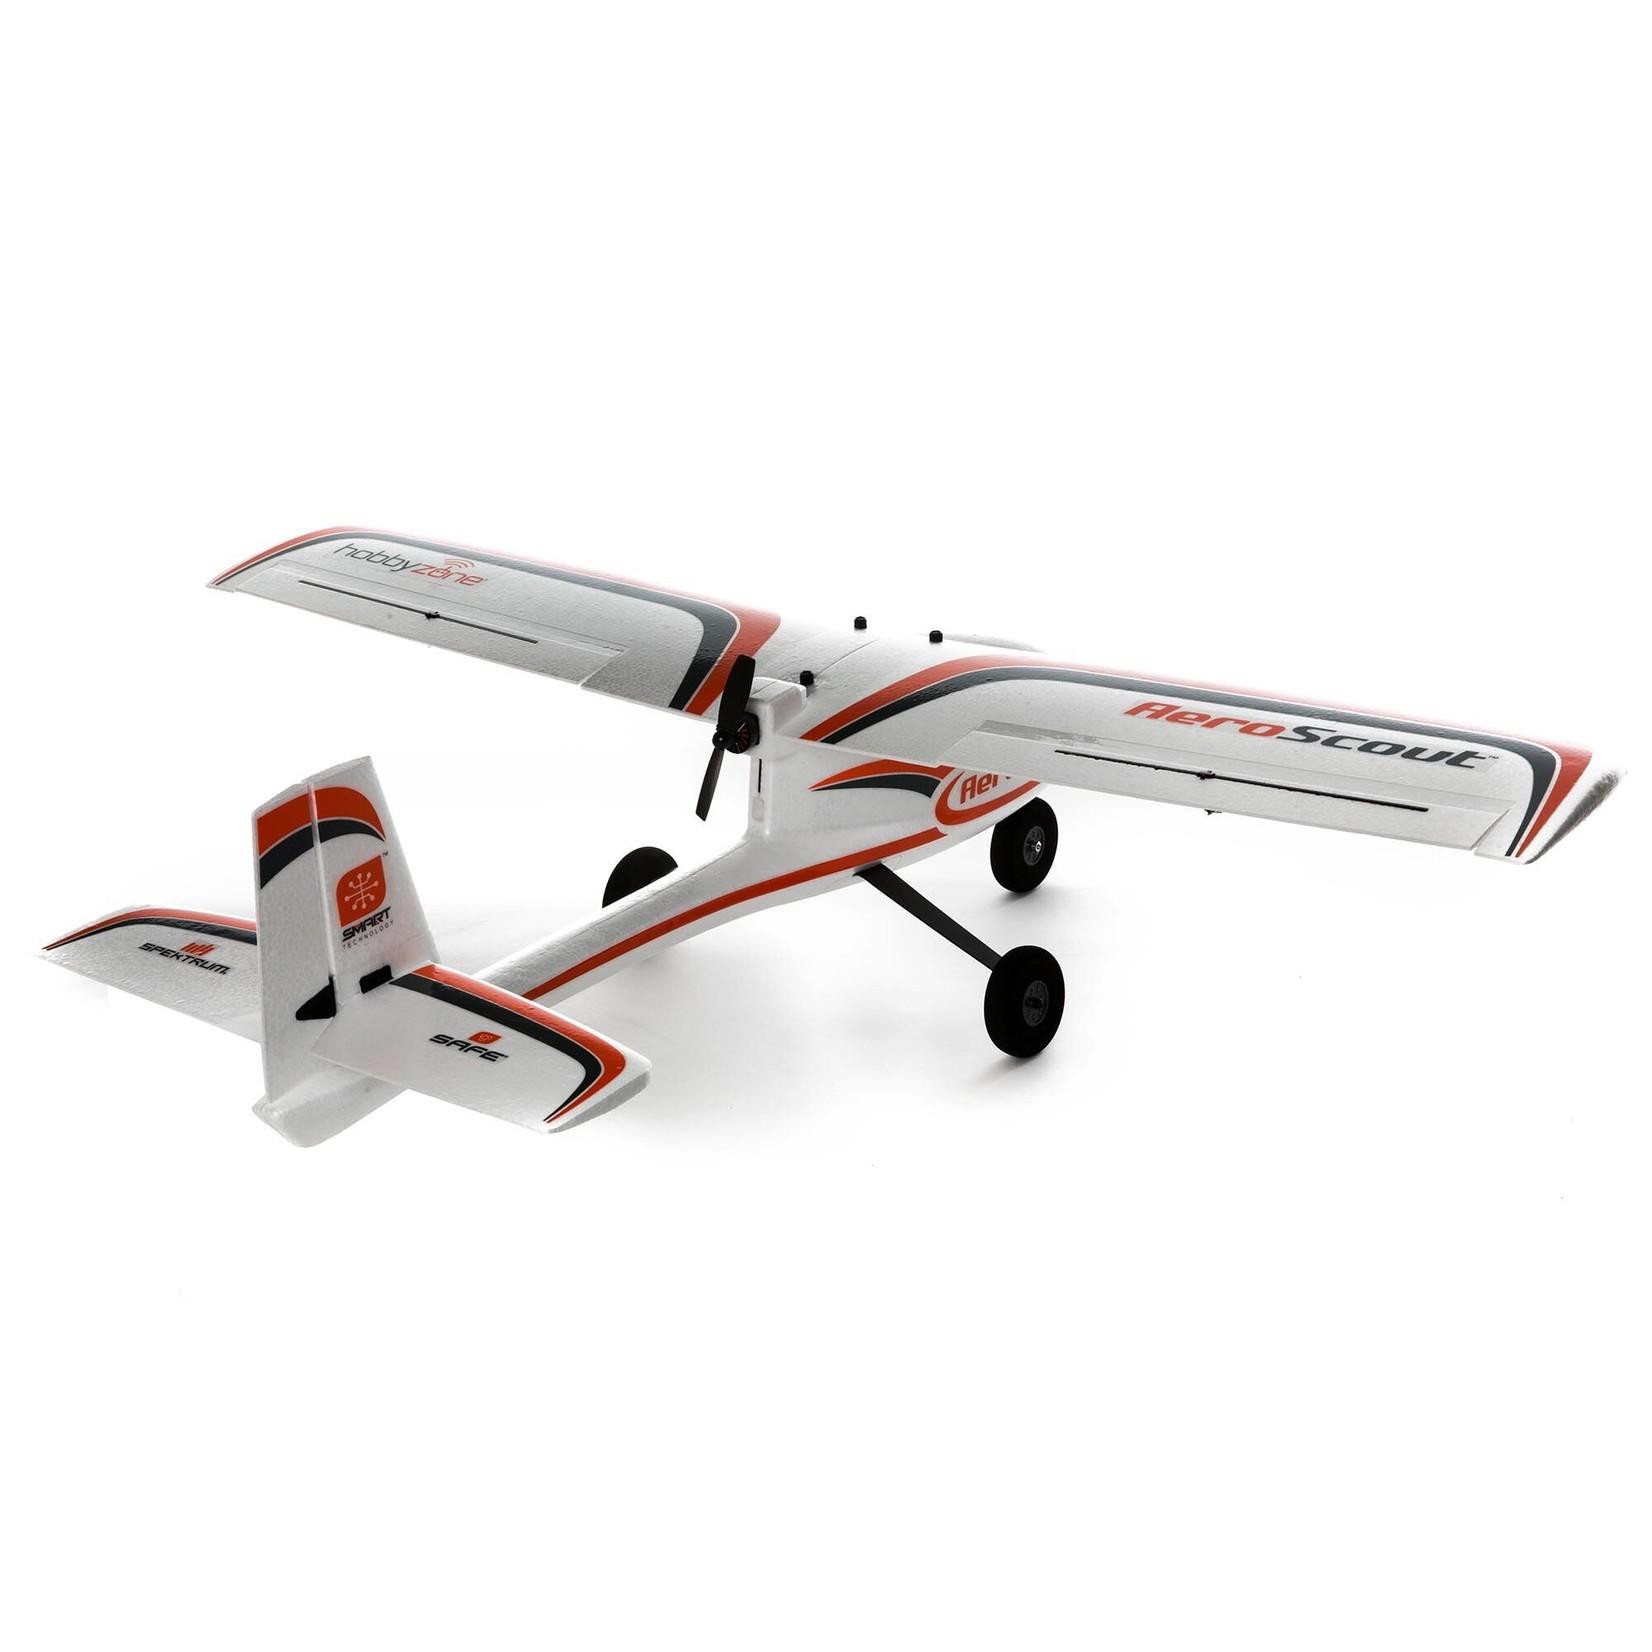 Aeroscout S 2: Drone Specifications for Aeroscout S 2